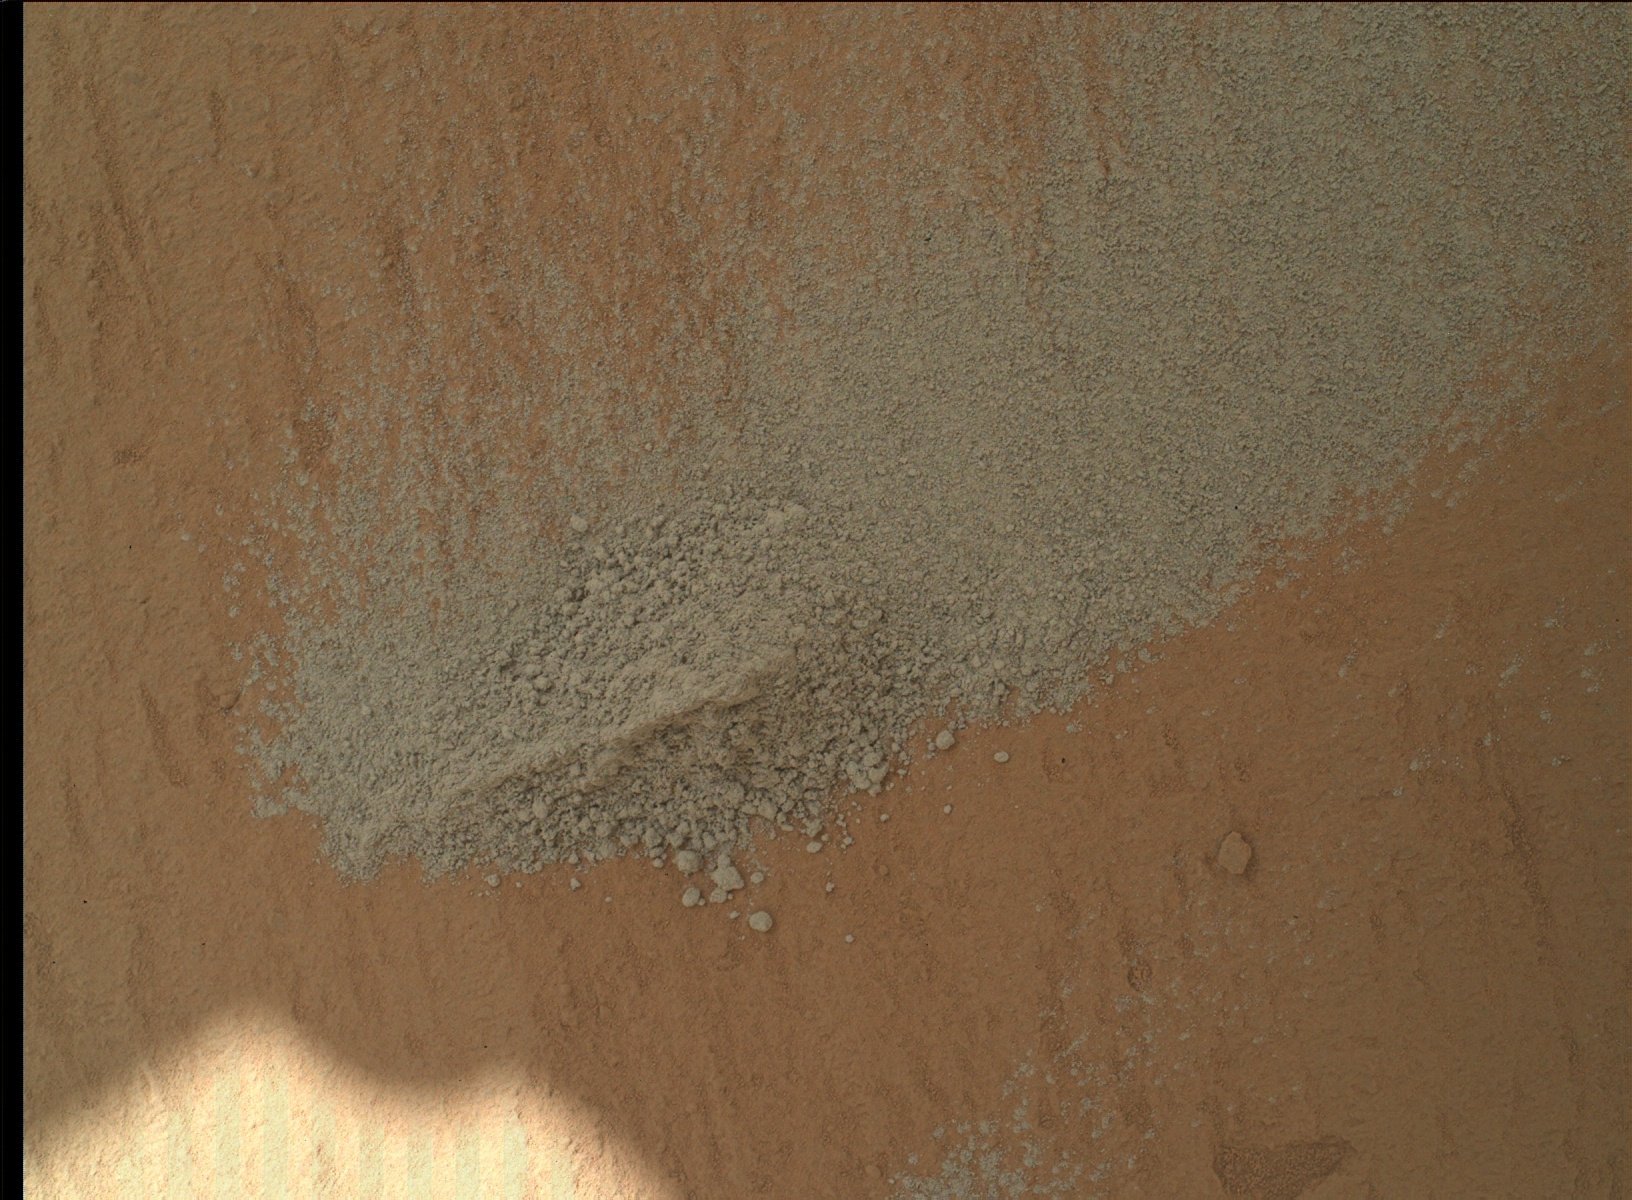 Nasa's Mars rover Curiosity acquired this image using its Mars Hand Lens Imager (MAHLI) on Sol 487